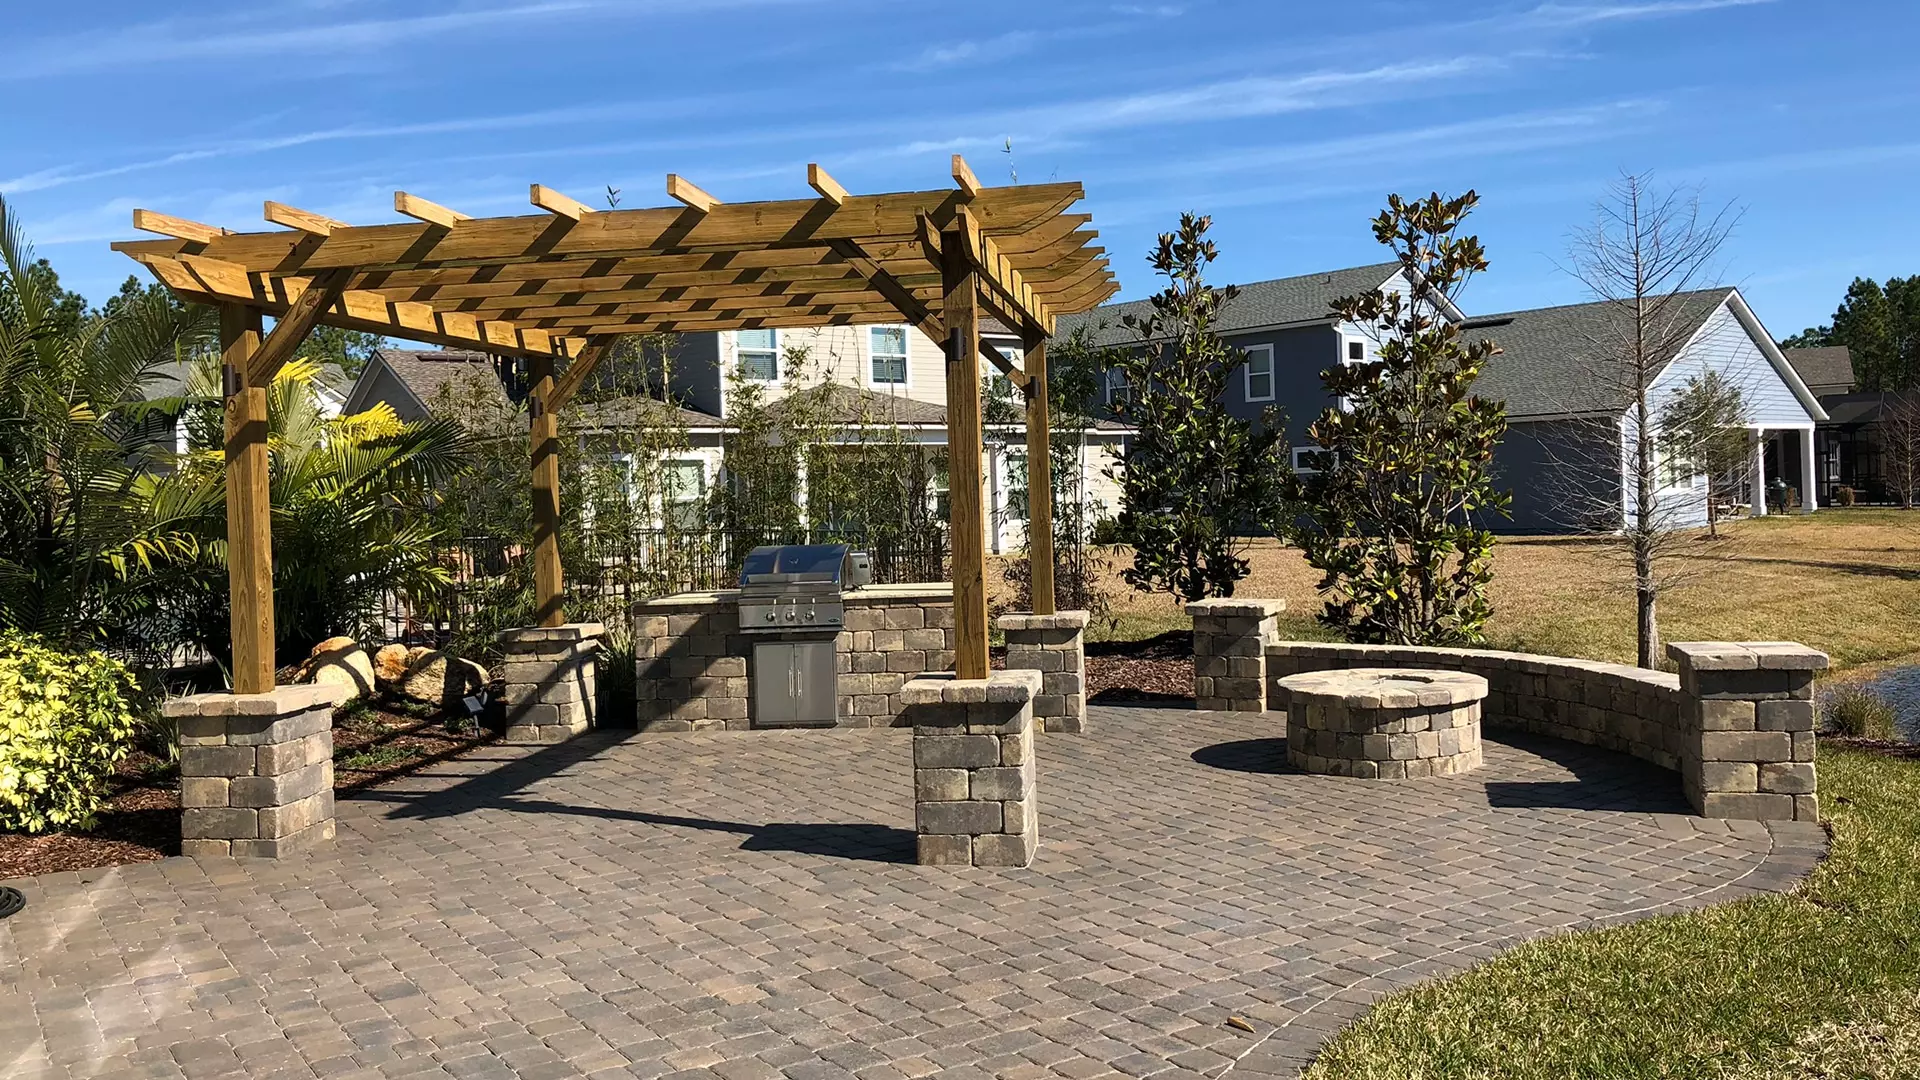 Add a pergola or pavilion to your outdoor space